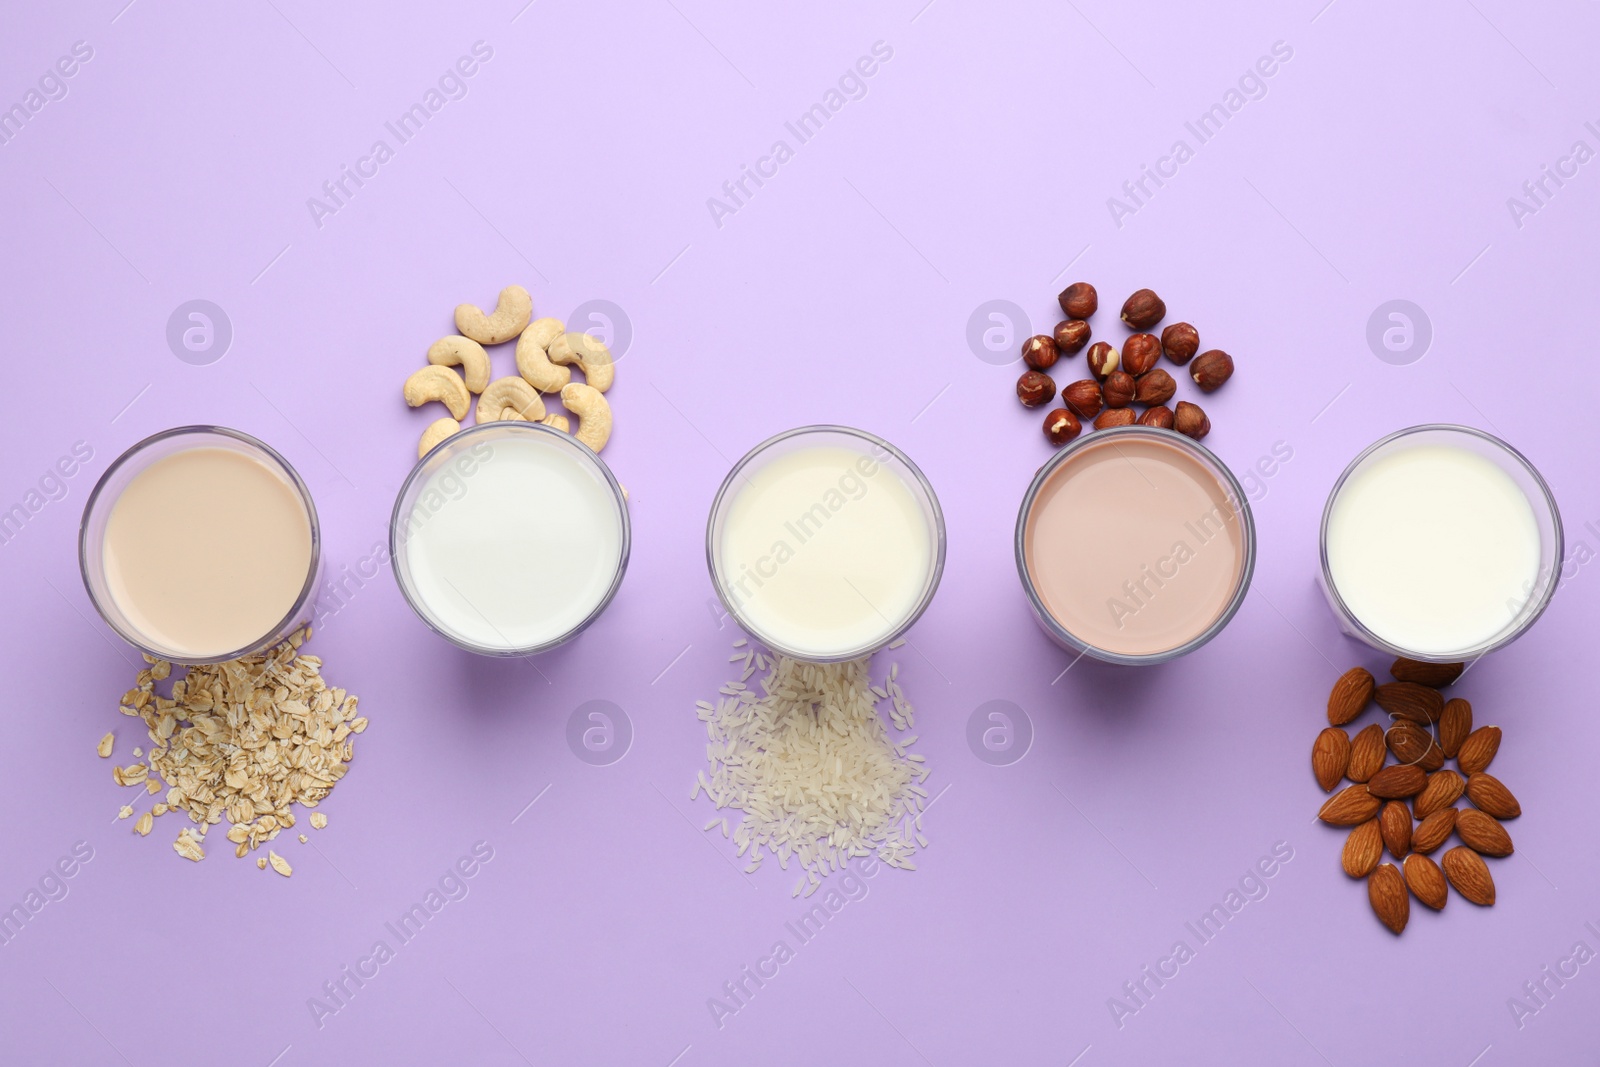 Photo of Different vegan milks and ingredients on violet background, flat lay